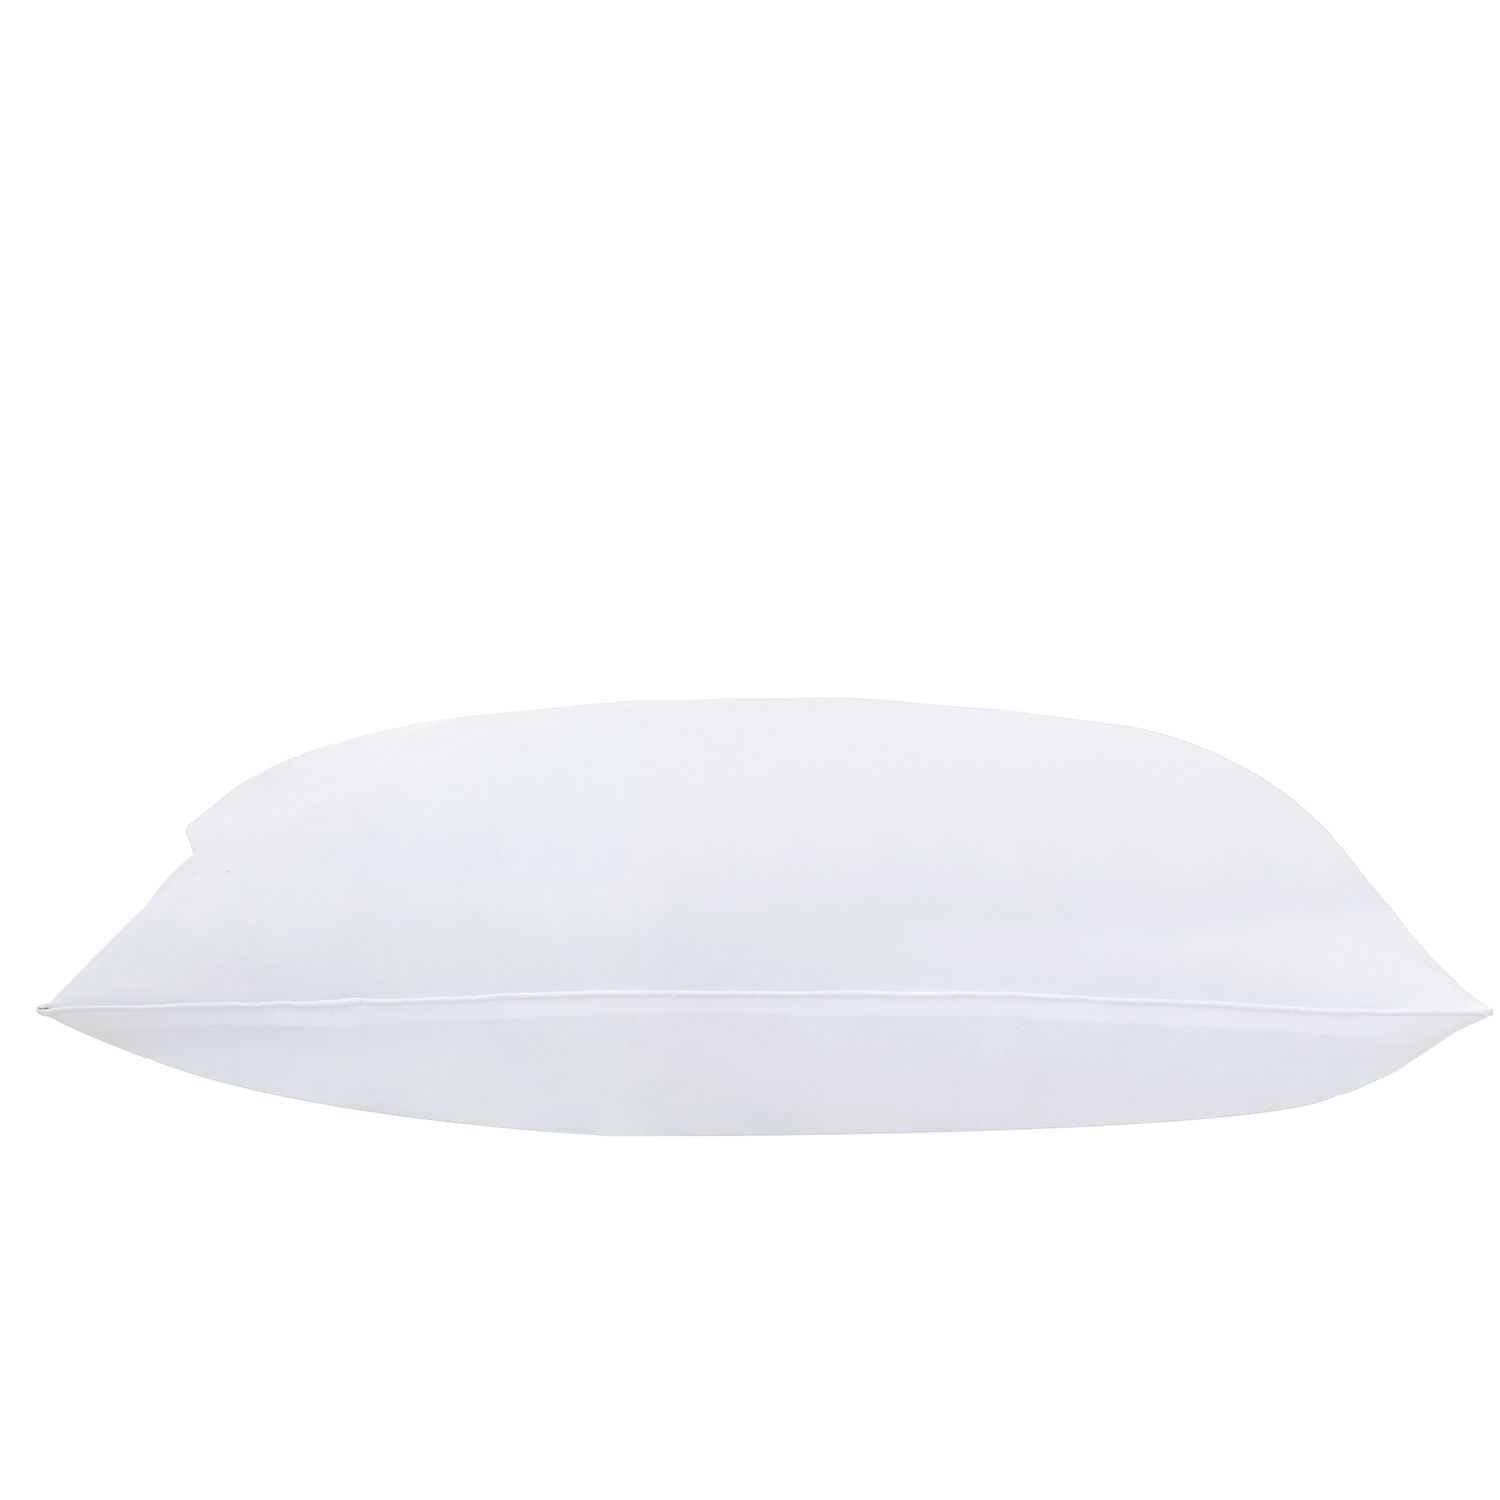 Image for Down Home Mini-Feather & Down Pillow at Kohl's.